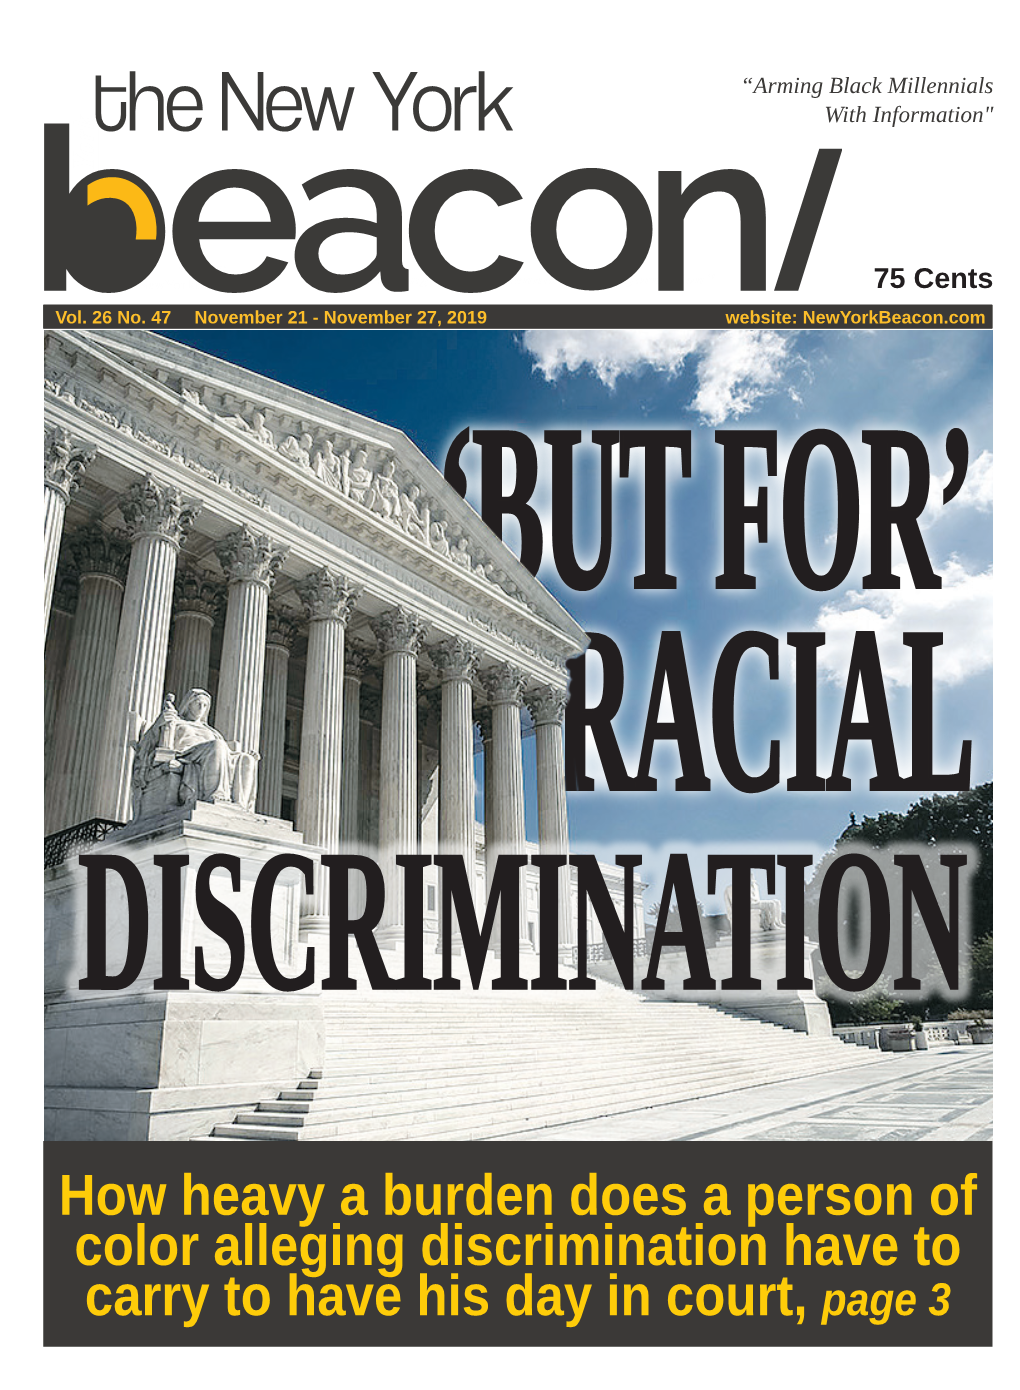 How Heavy a Burden Does a Person of Color Alleging Discrimination Have to Carry to Have His Day in Court, Page 3